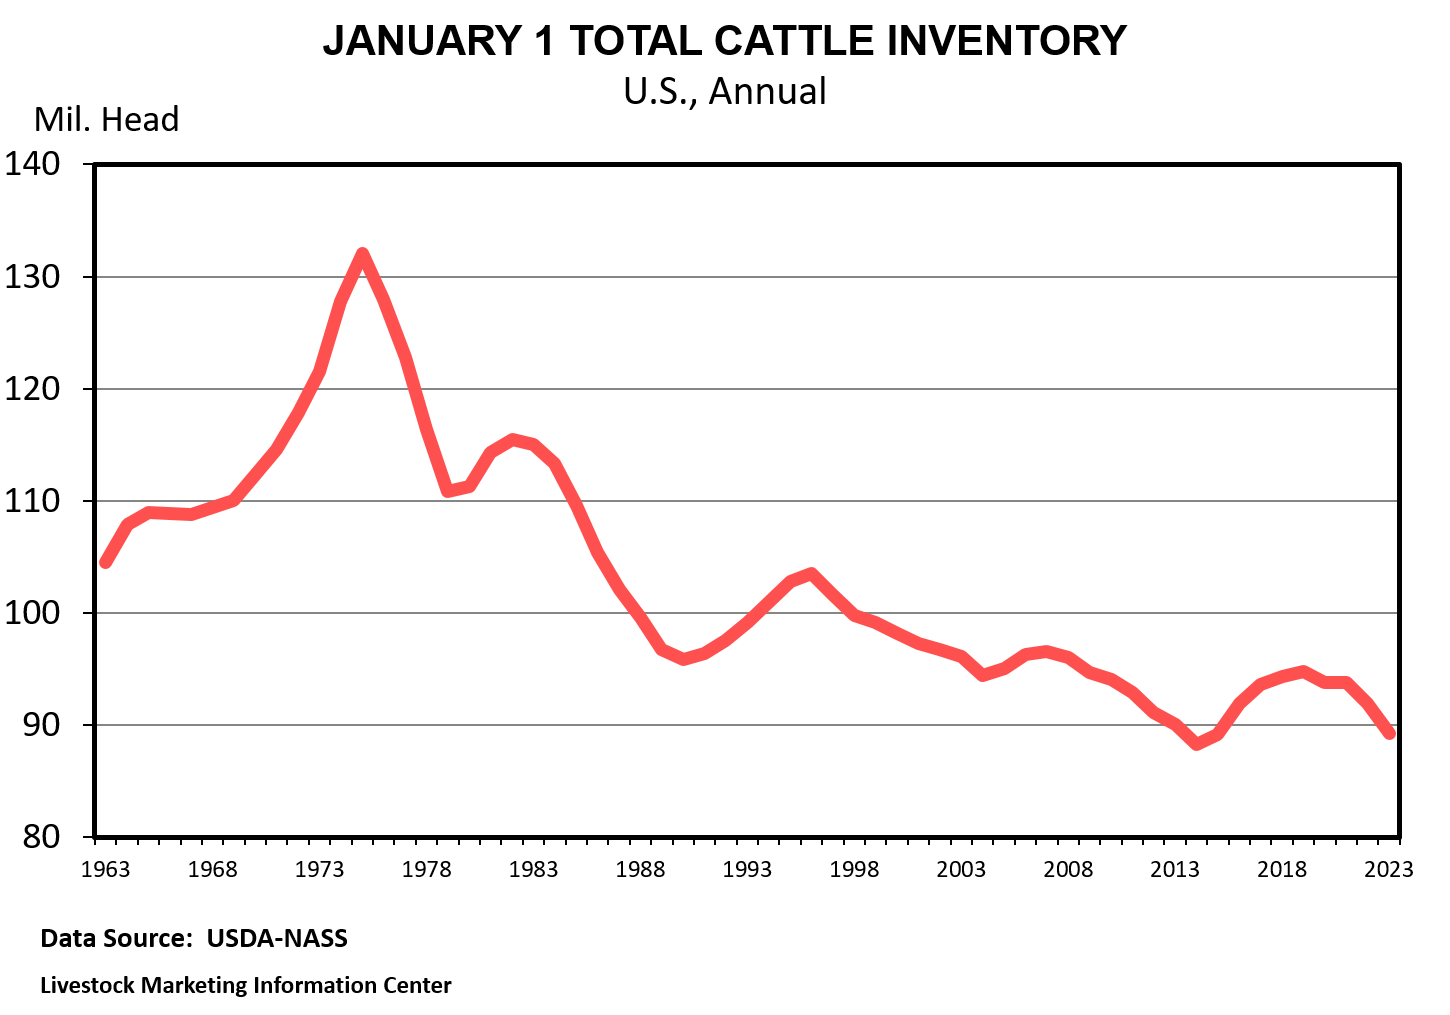 Total U.S. cattle inventory from 1963 to 2023 shows a spike in numbers in the mid-1970s of about 133 million head followed by an uneven but gradual decline to the present day with about 90 million head of cattle.